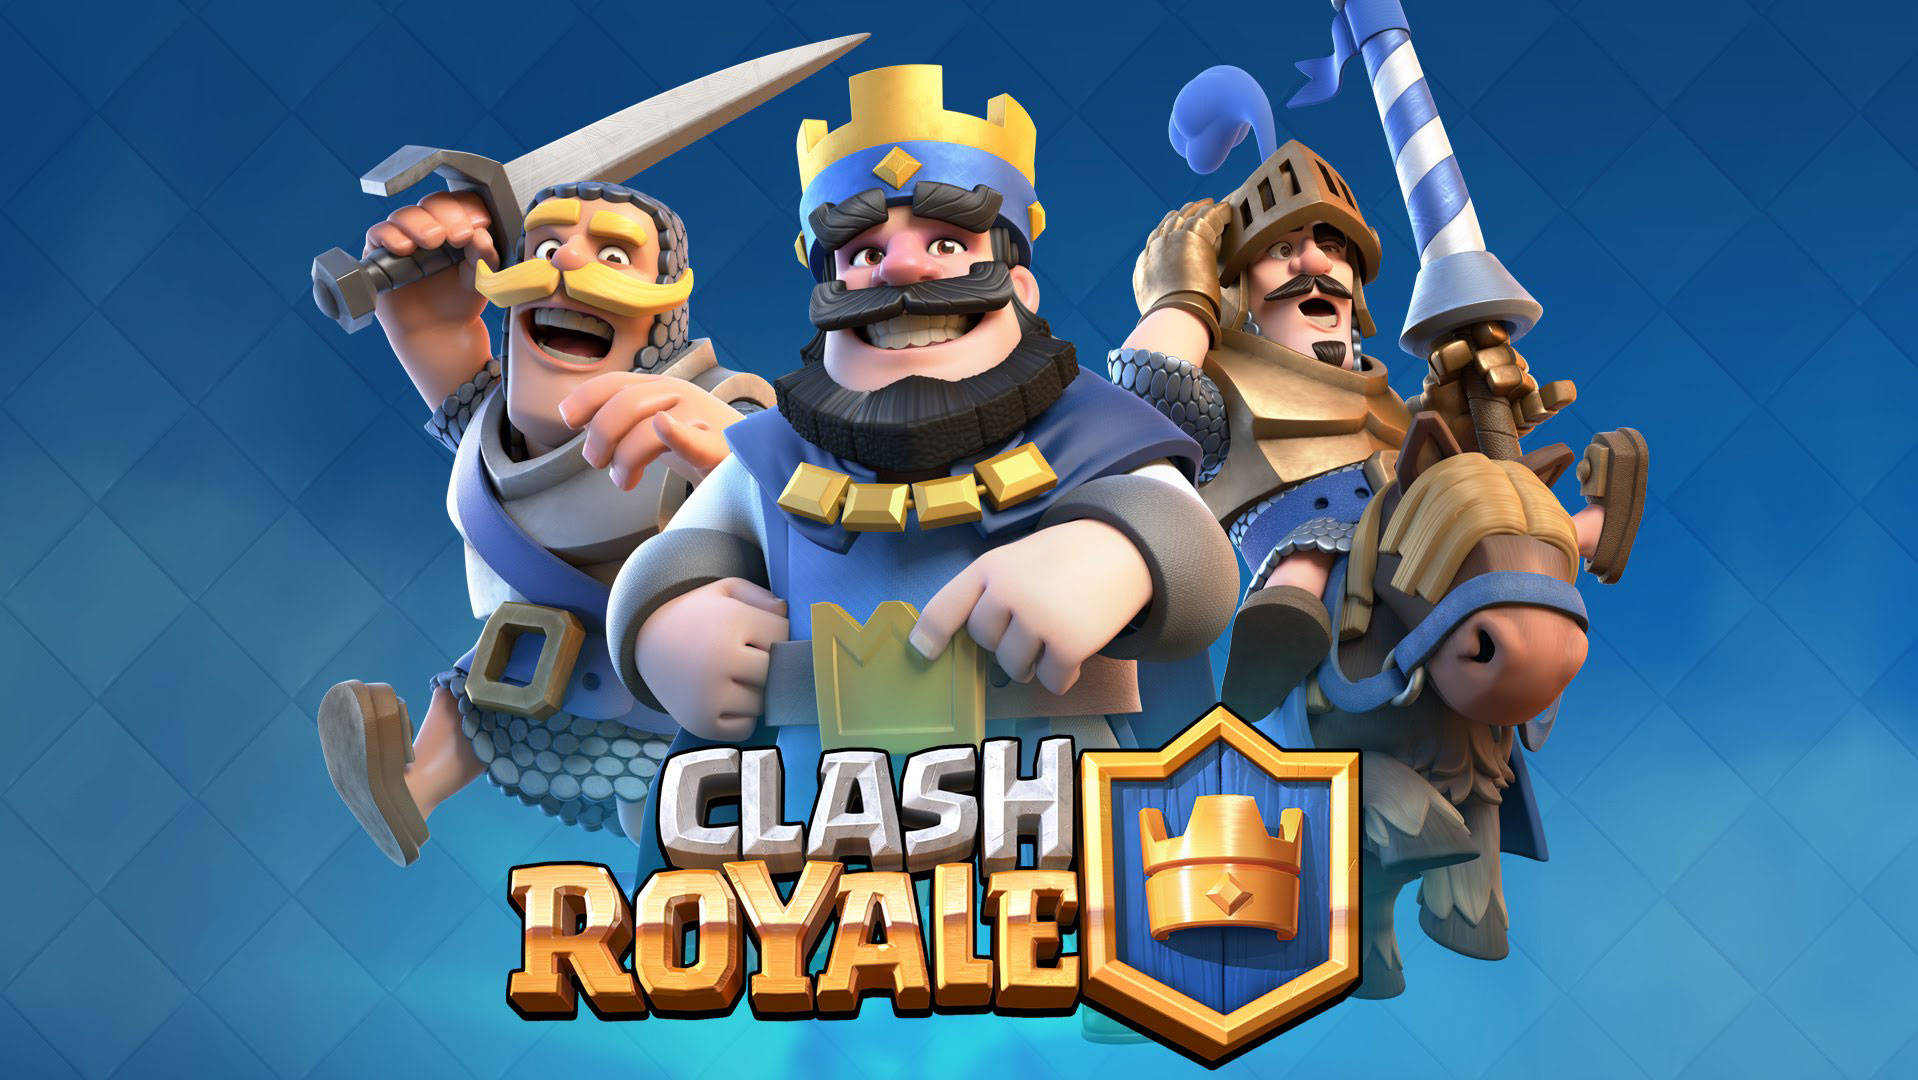 Clash Royale Characters Wallpaper